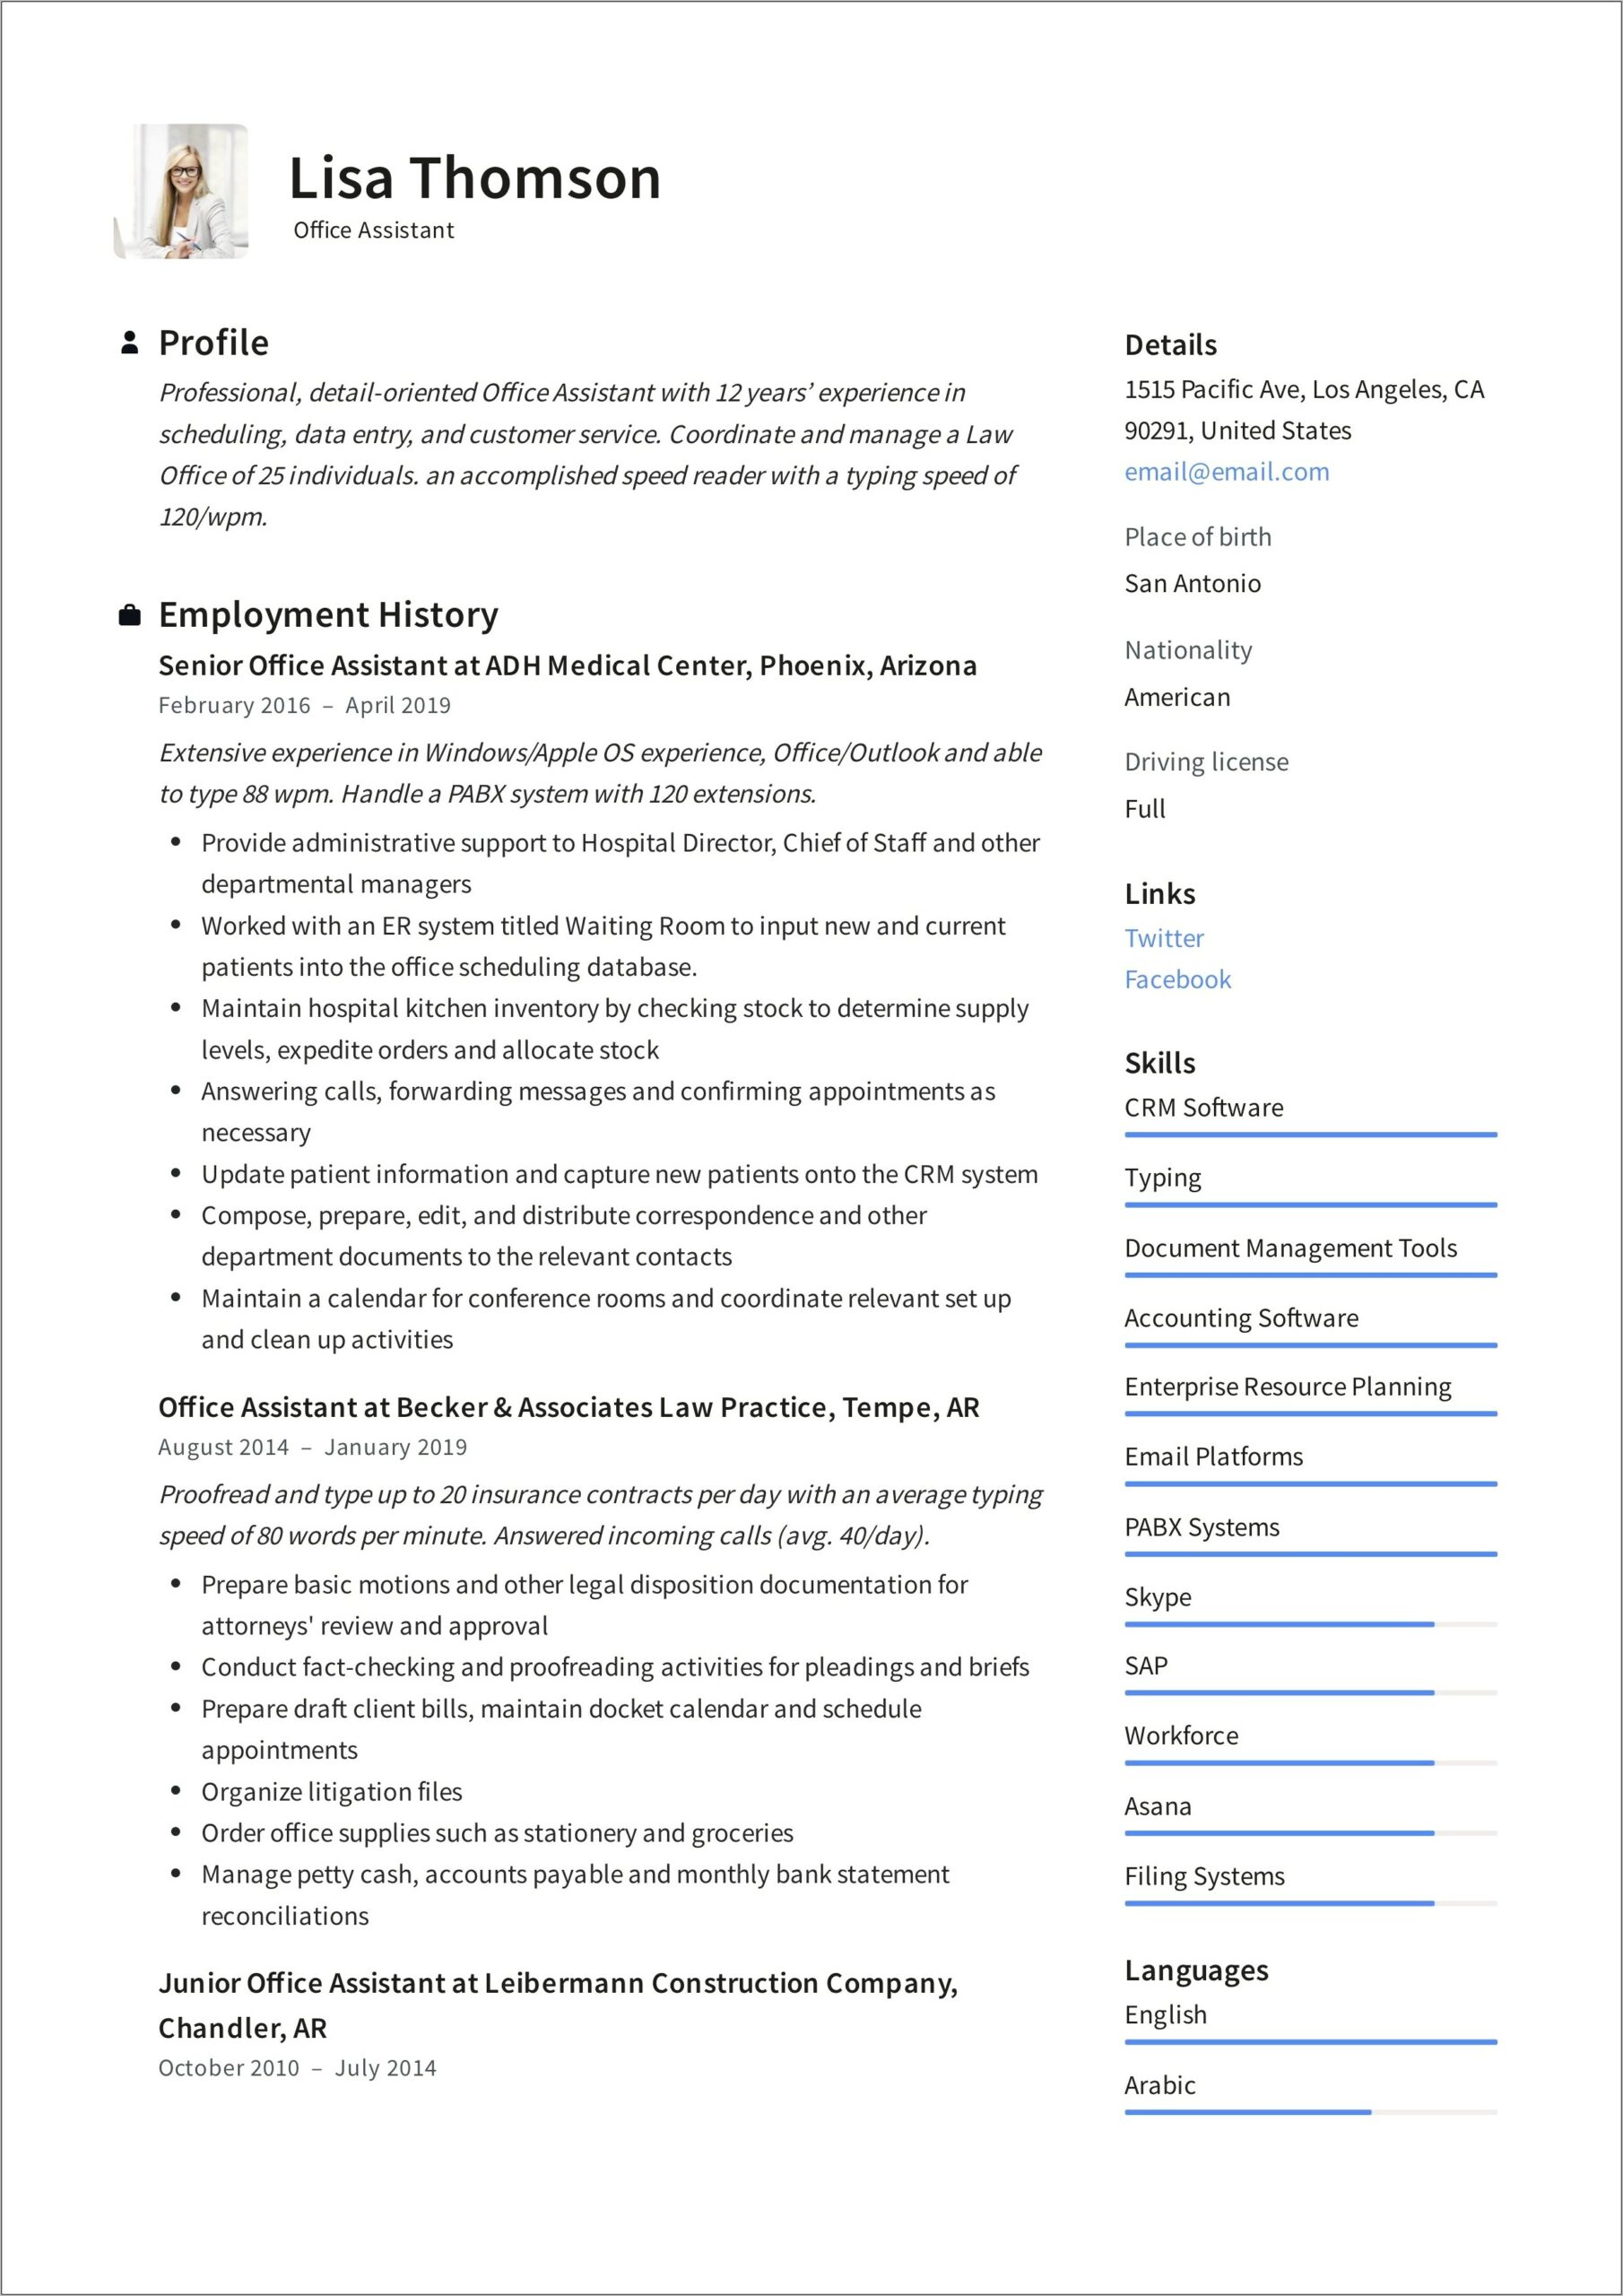 Resume Sample For An Office Assistant